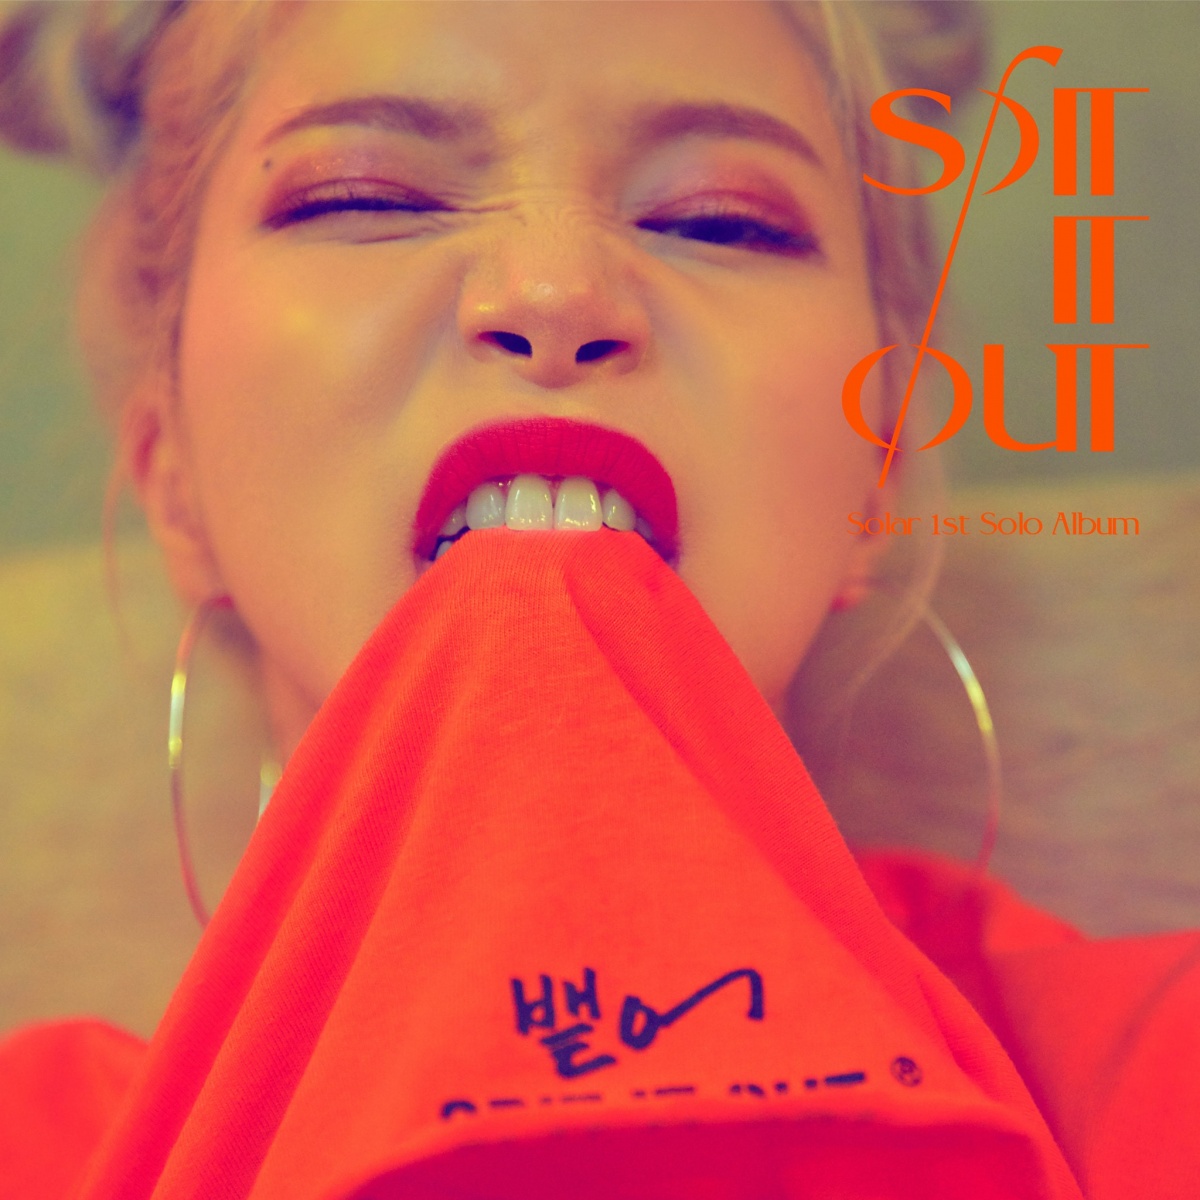 Mamamoo Solar, gorgeous fingertip performance, solo debut song 'SPIT IT OUT' teaser